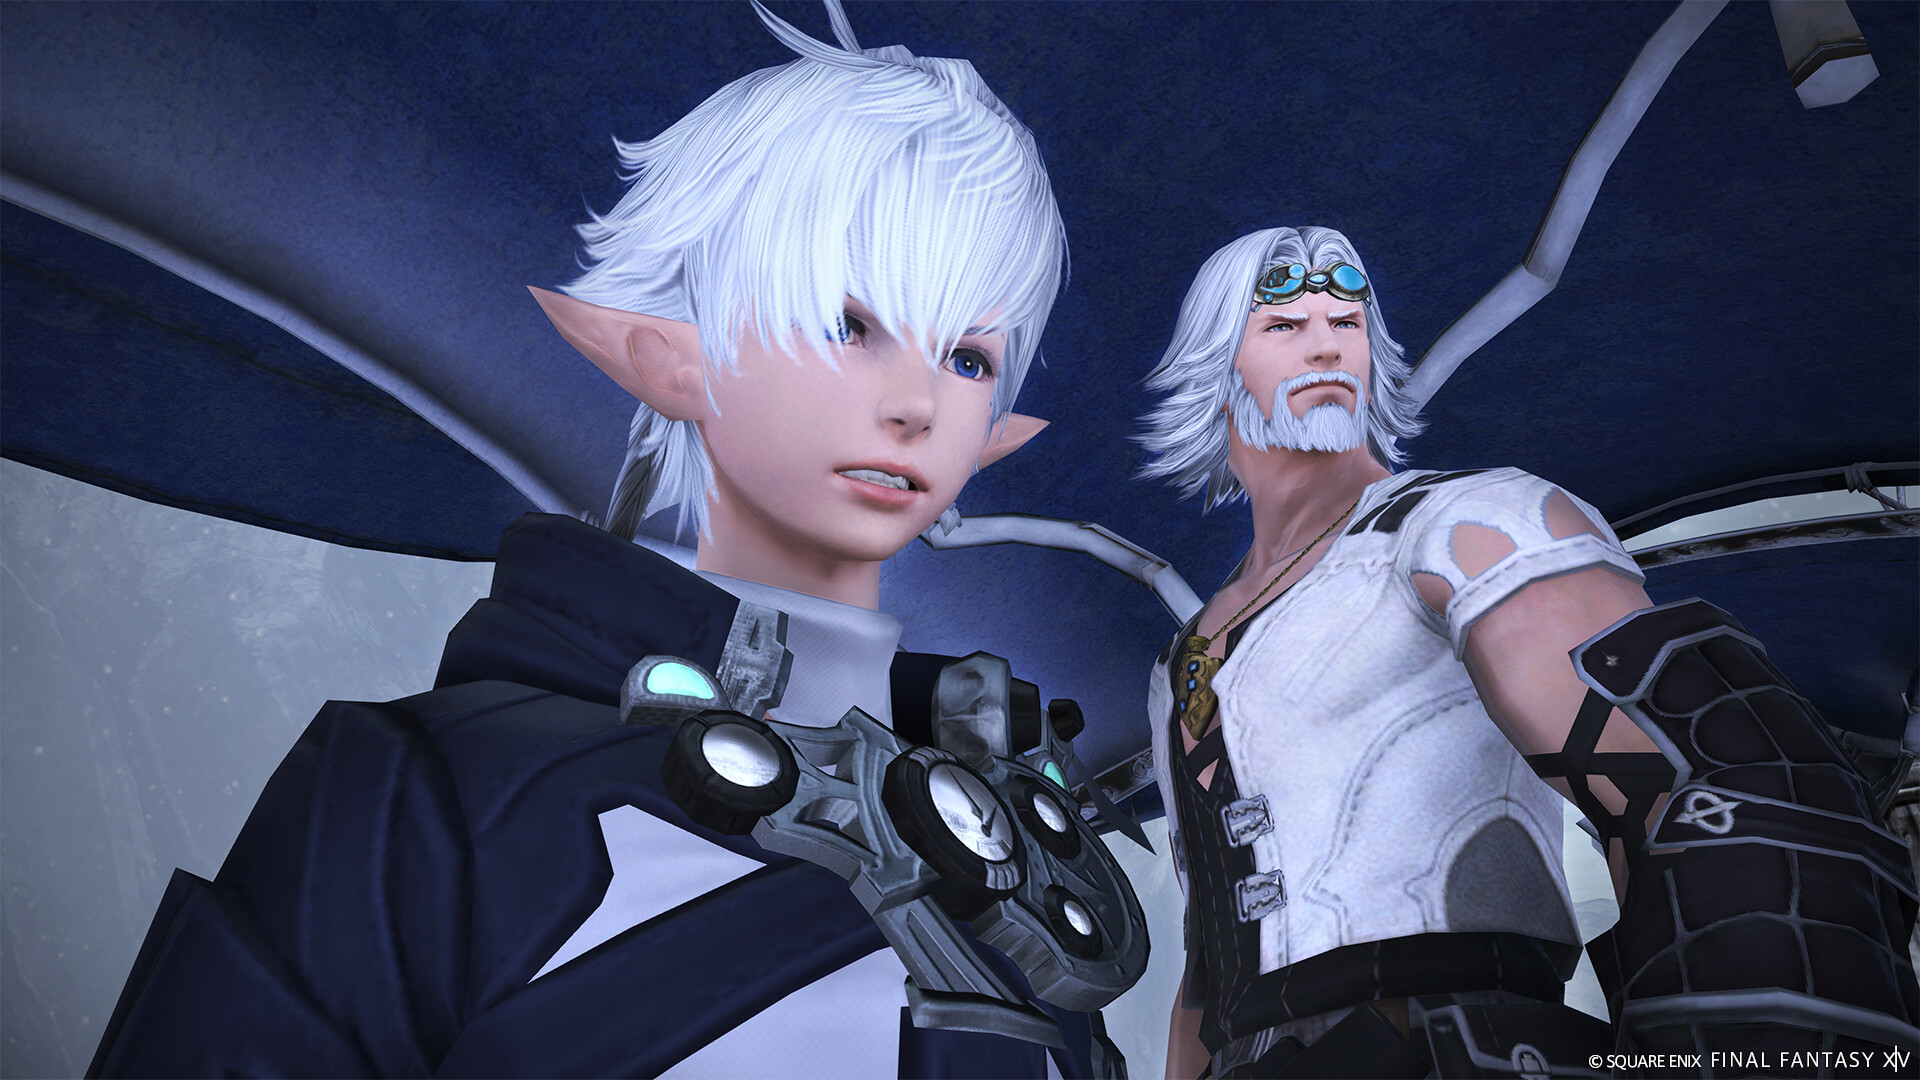 FFXIV Steam Versions Will Have a Square Enix Account Link Soon